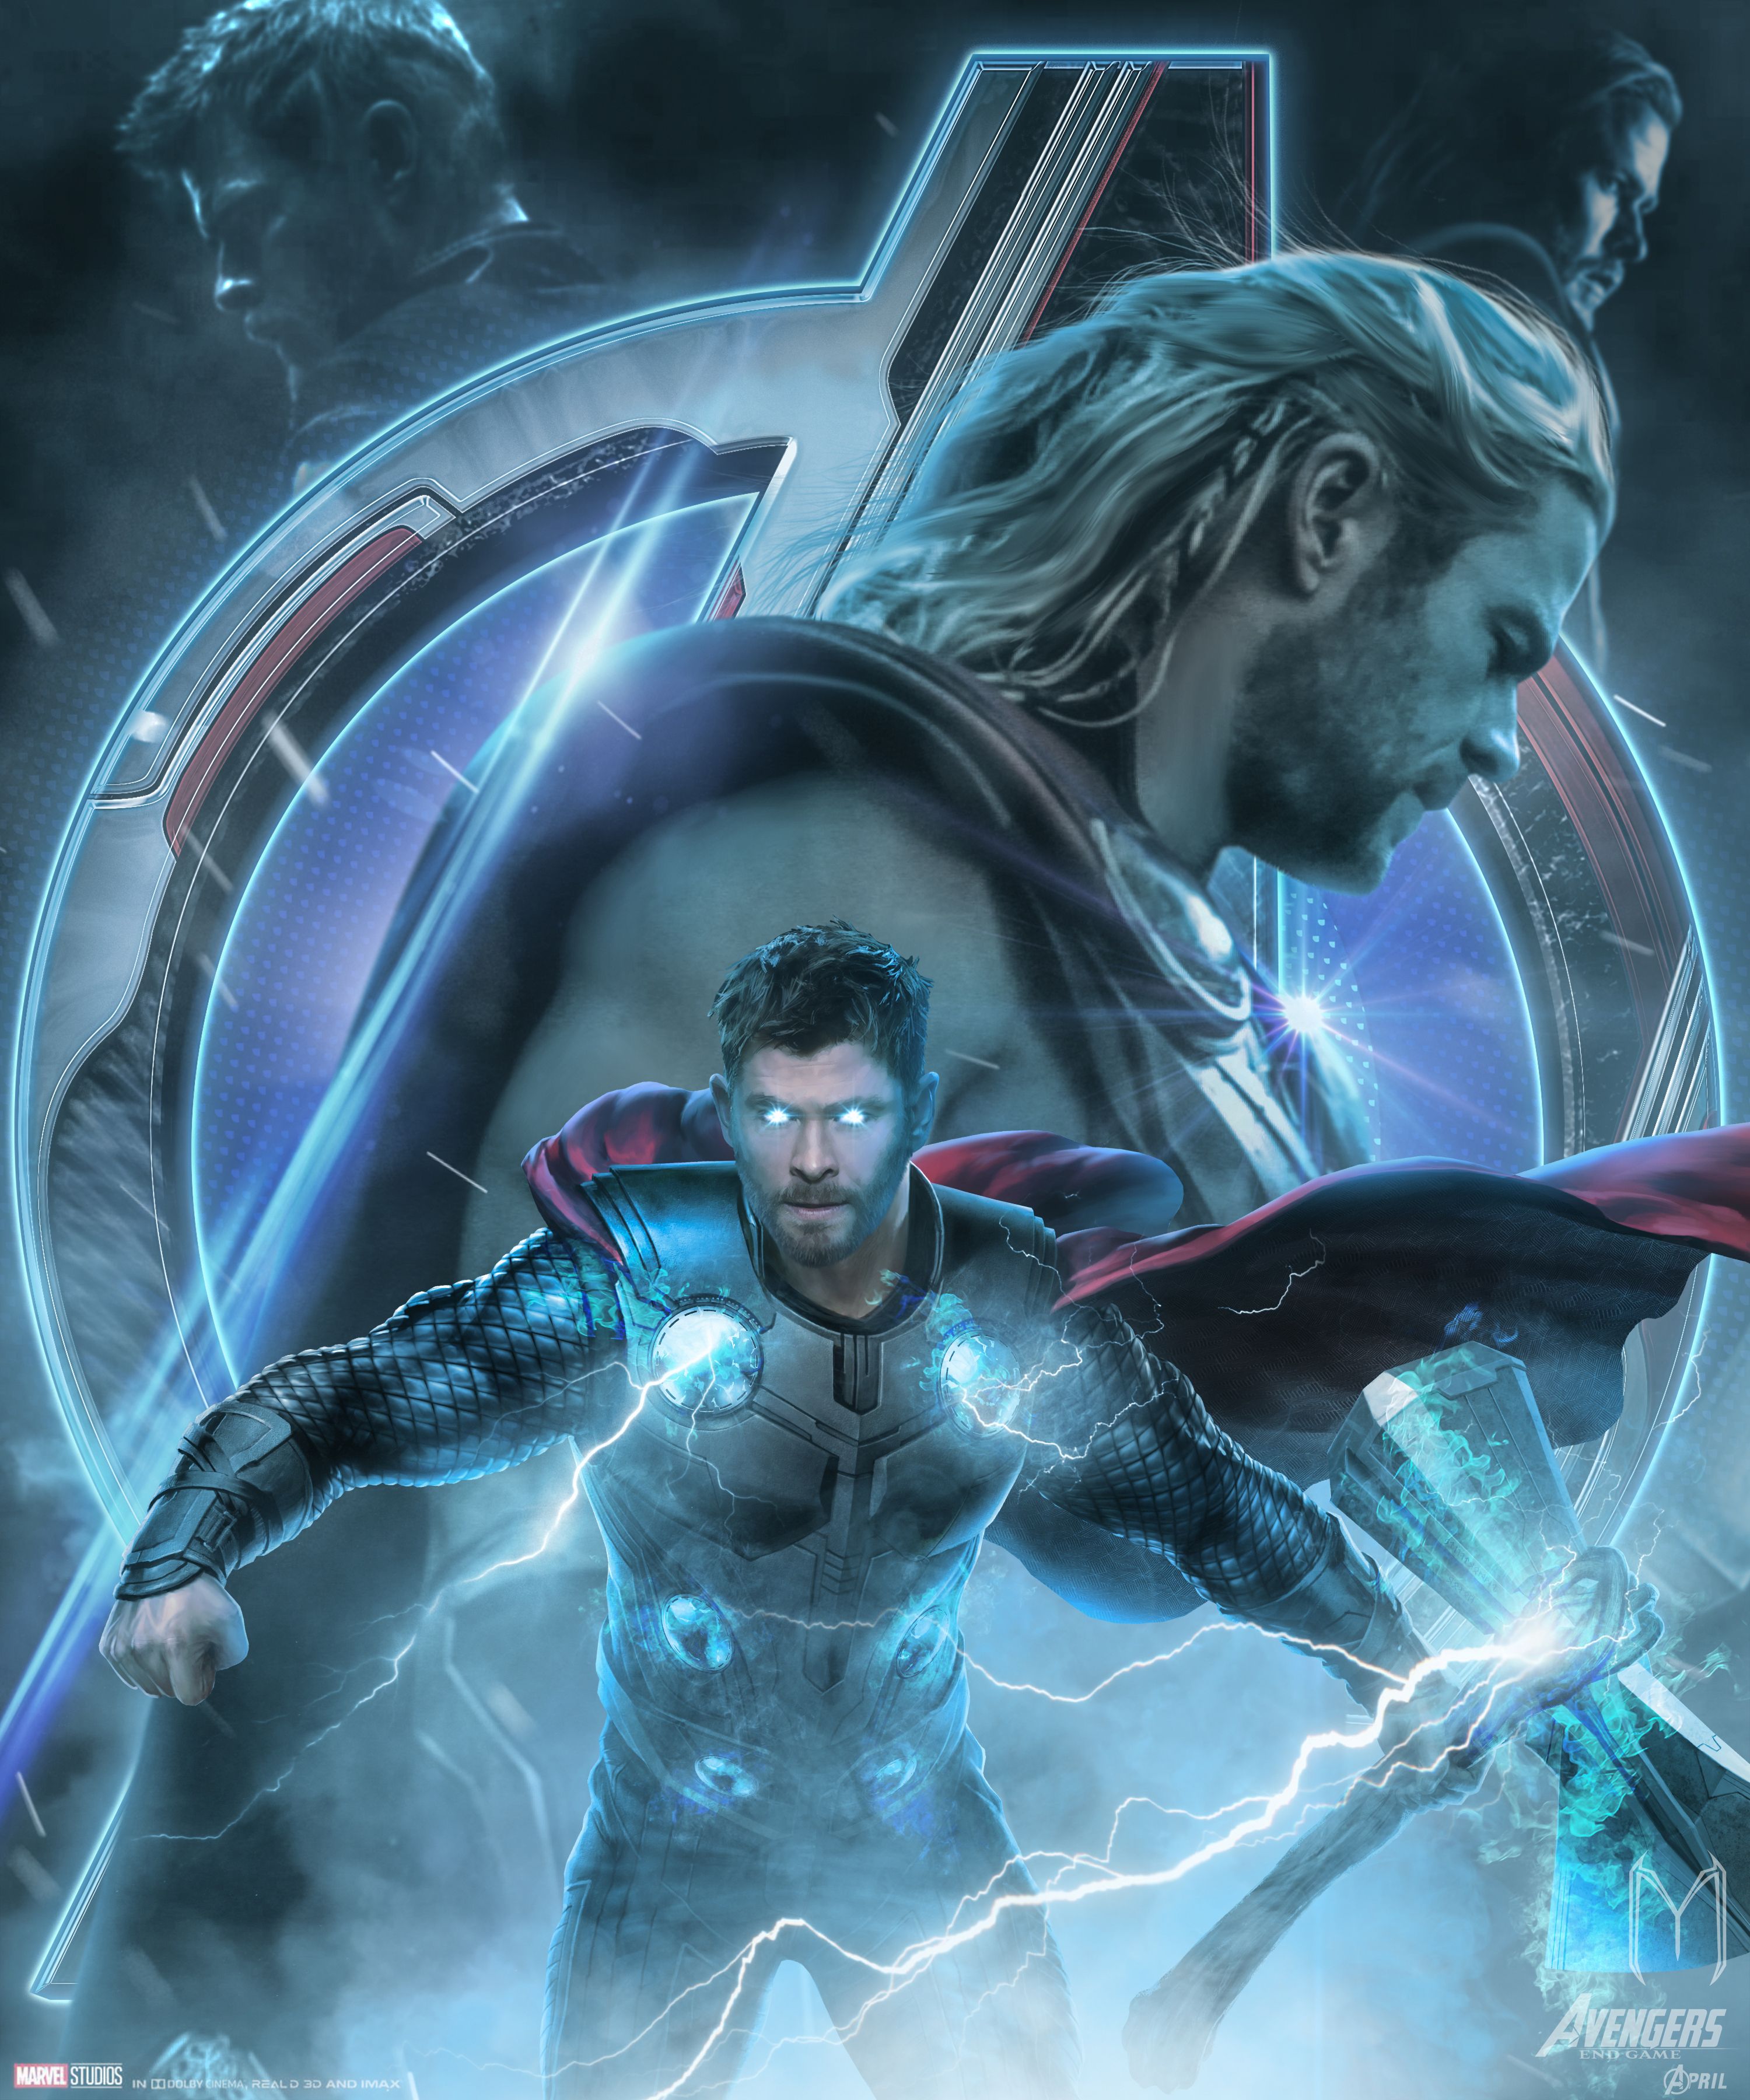 Avengers Endgame Thor Poster Artwork Wallpaper, HD Movies 4K Wallpaper, Image, Photo and Background